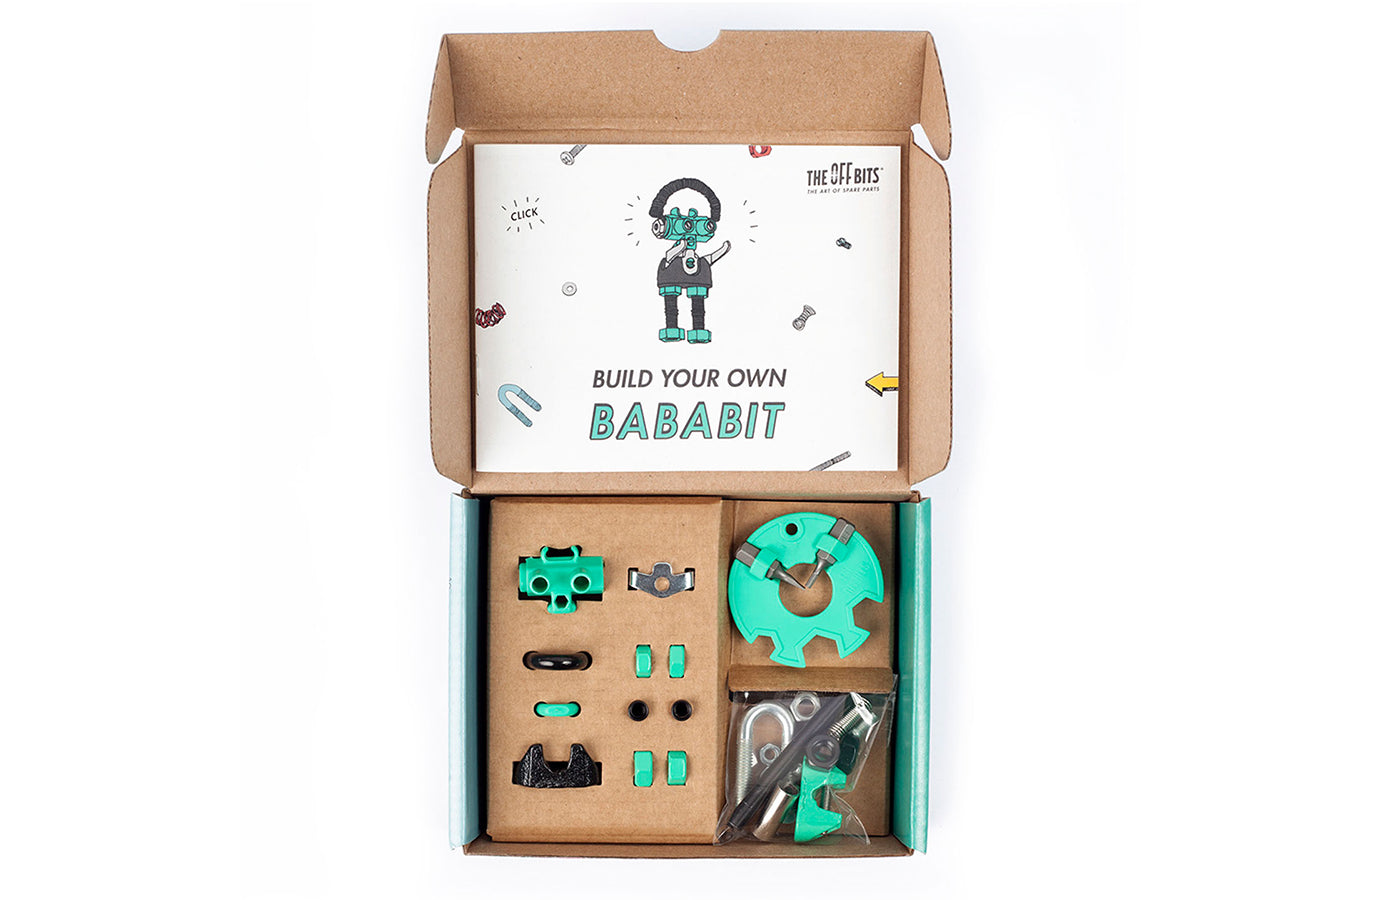 The OFFBITS - Character Kit - BabaBit